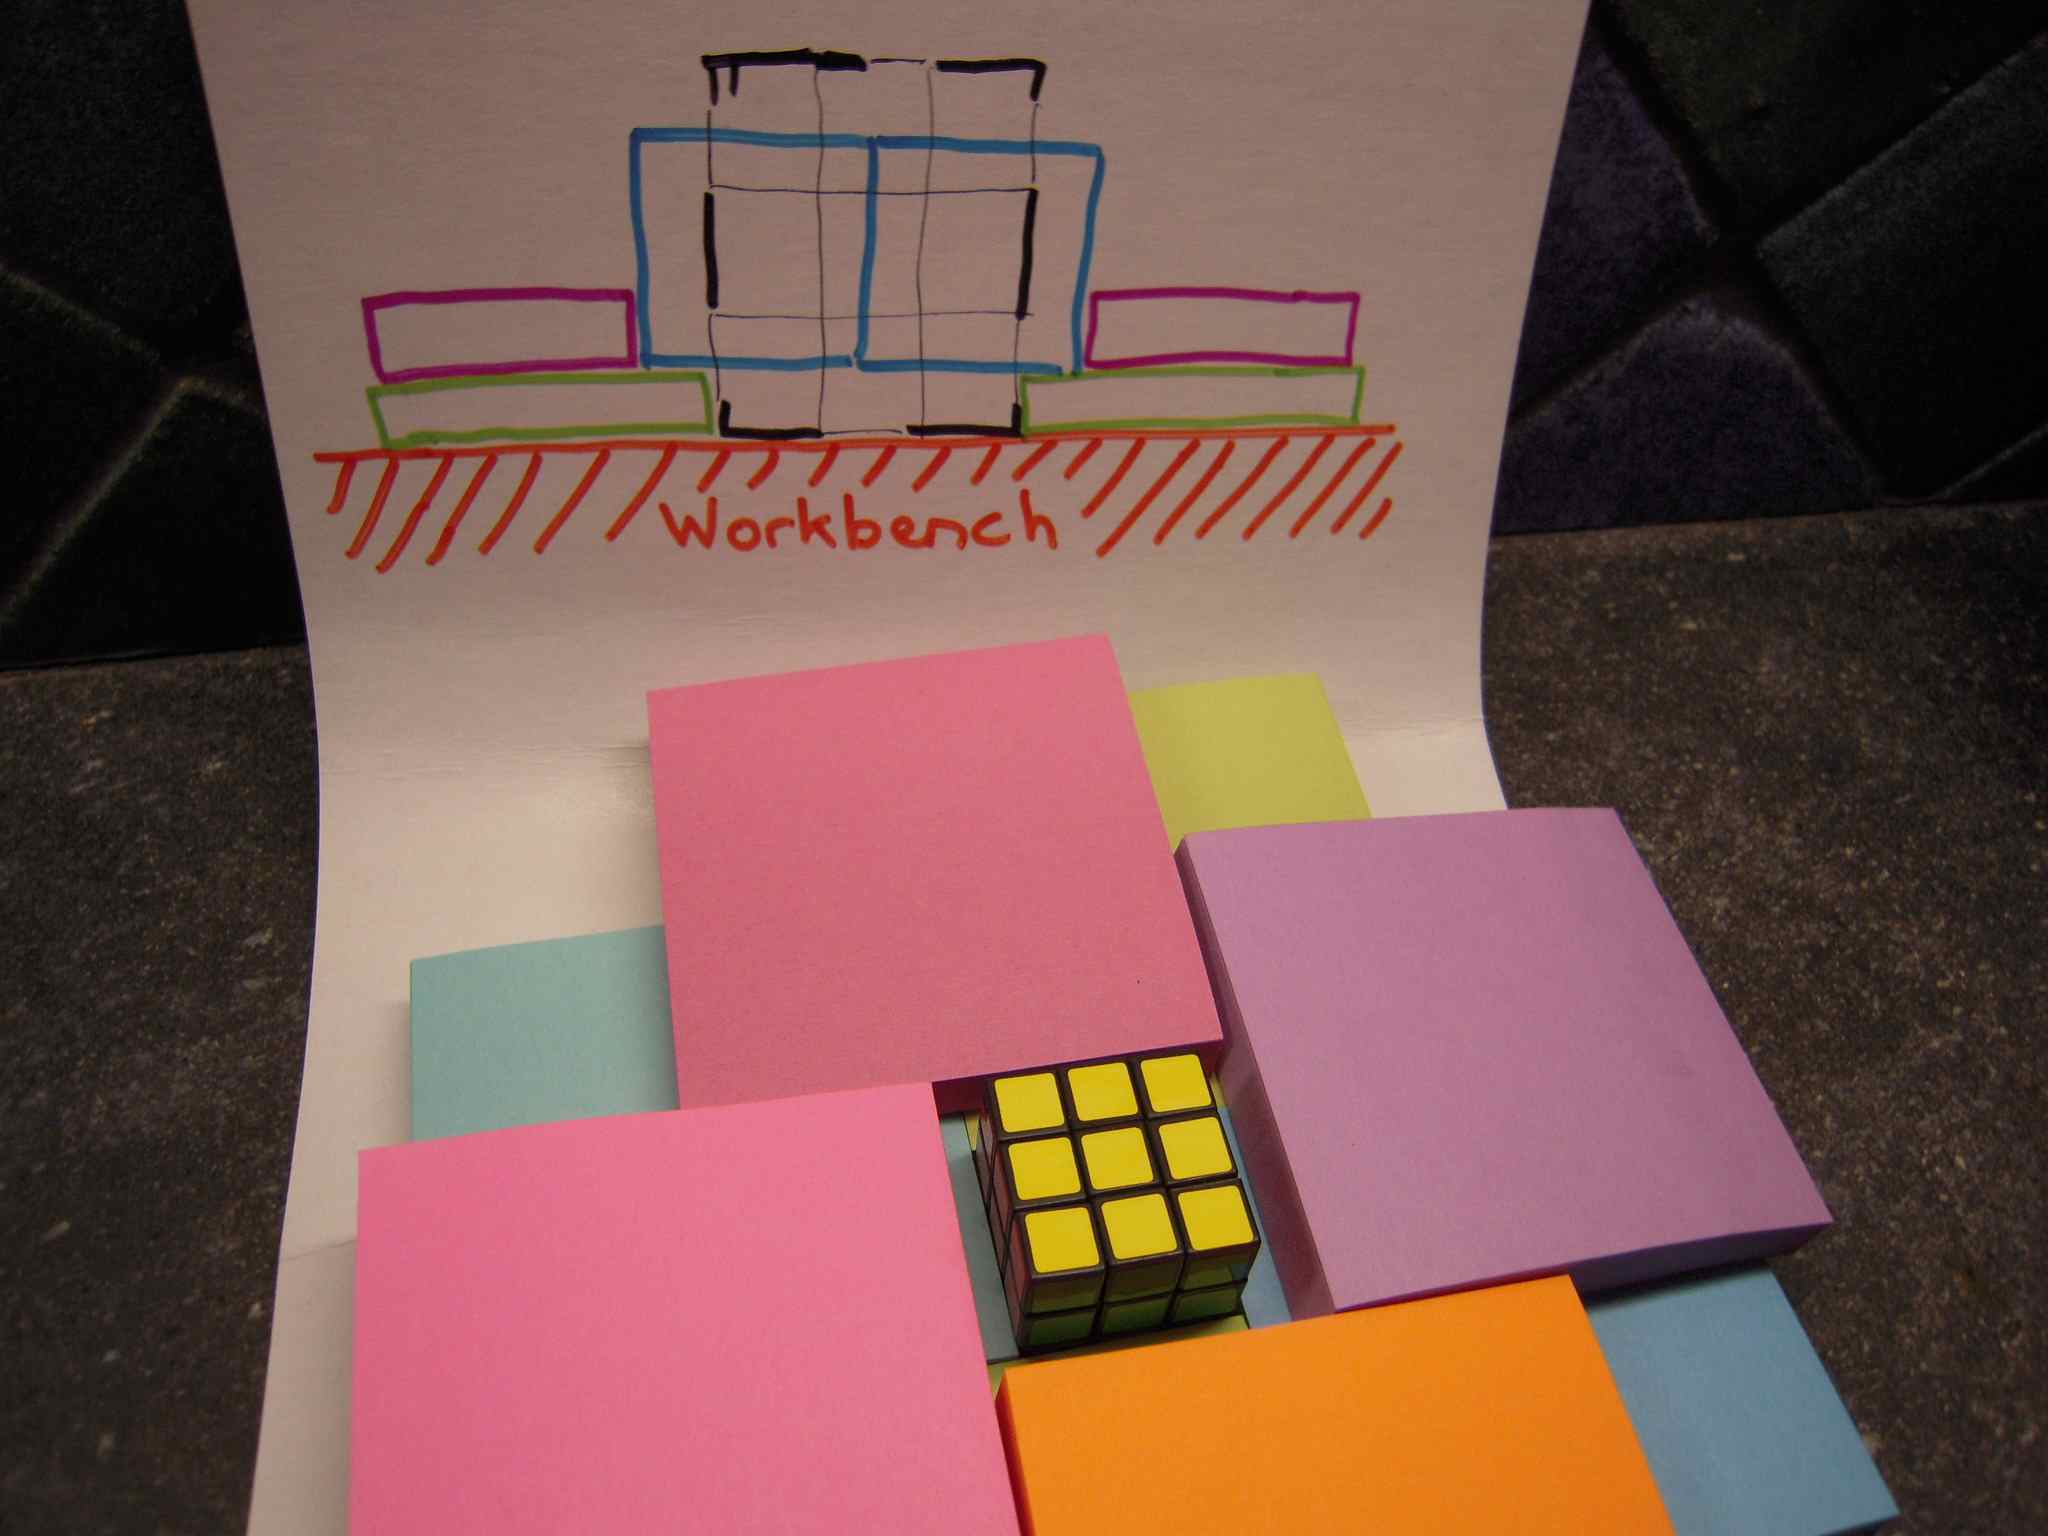 The ''pinwheel'' arrangement of sticky-note pads